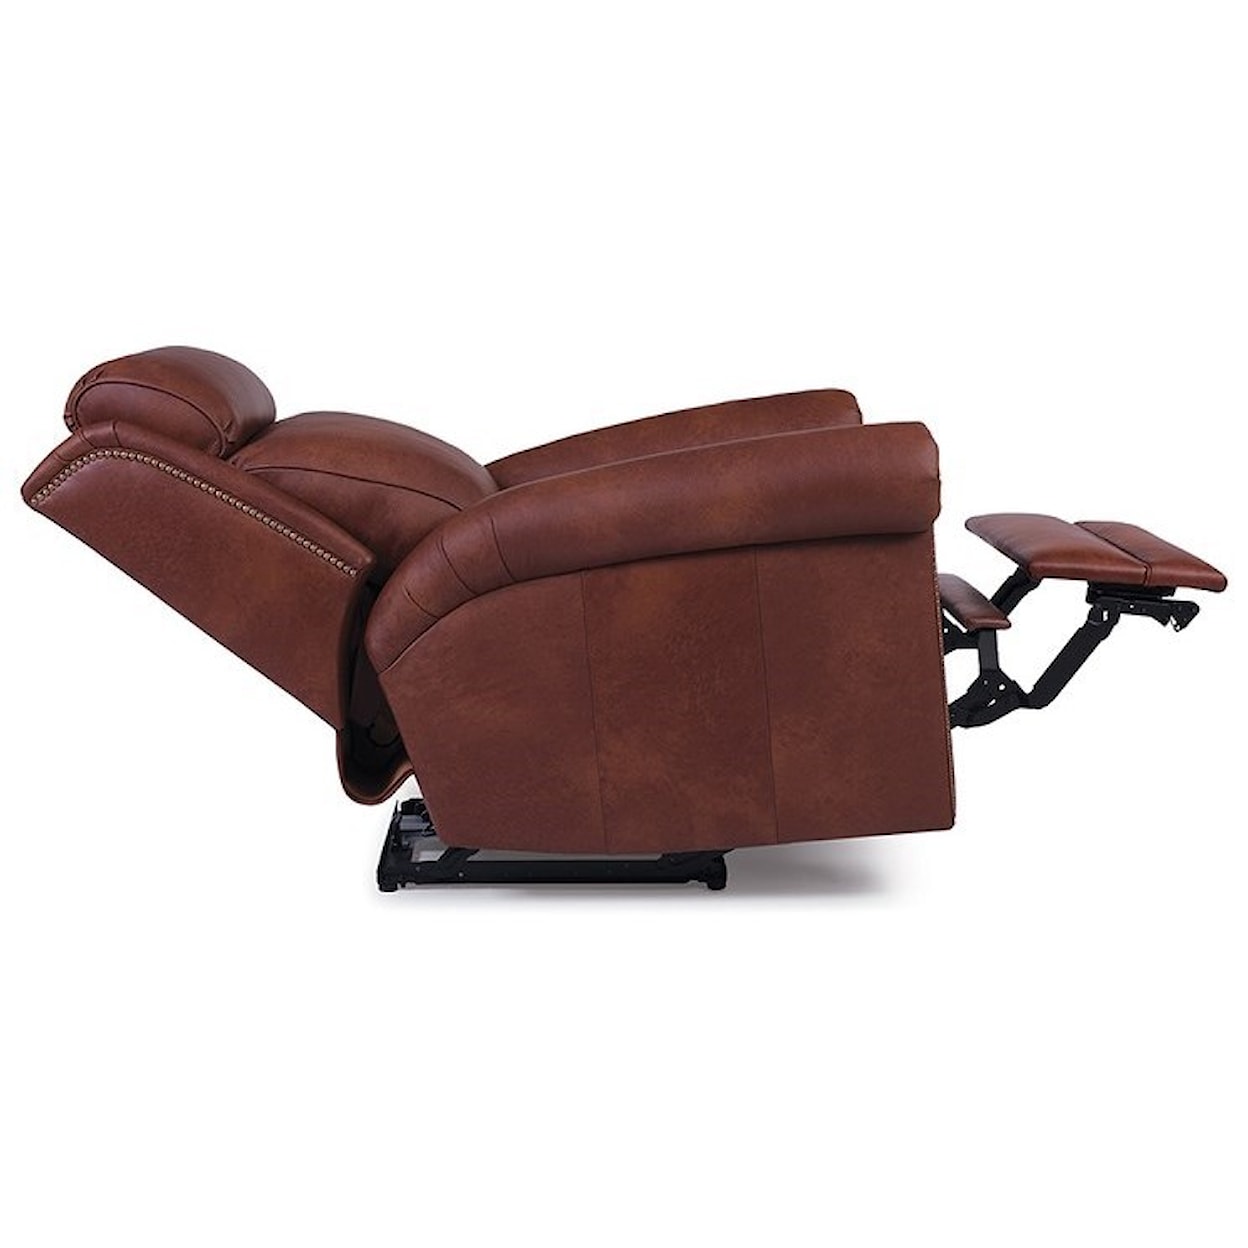 Smith Brothers 737 Power Recliner